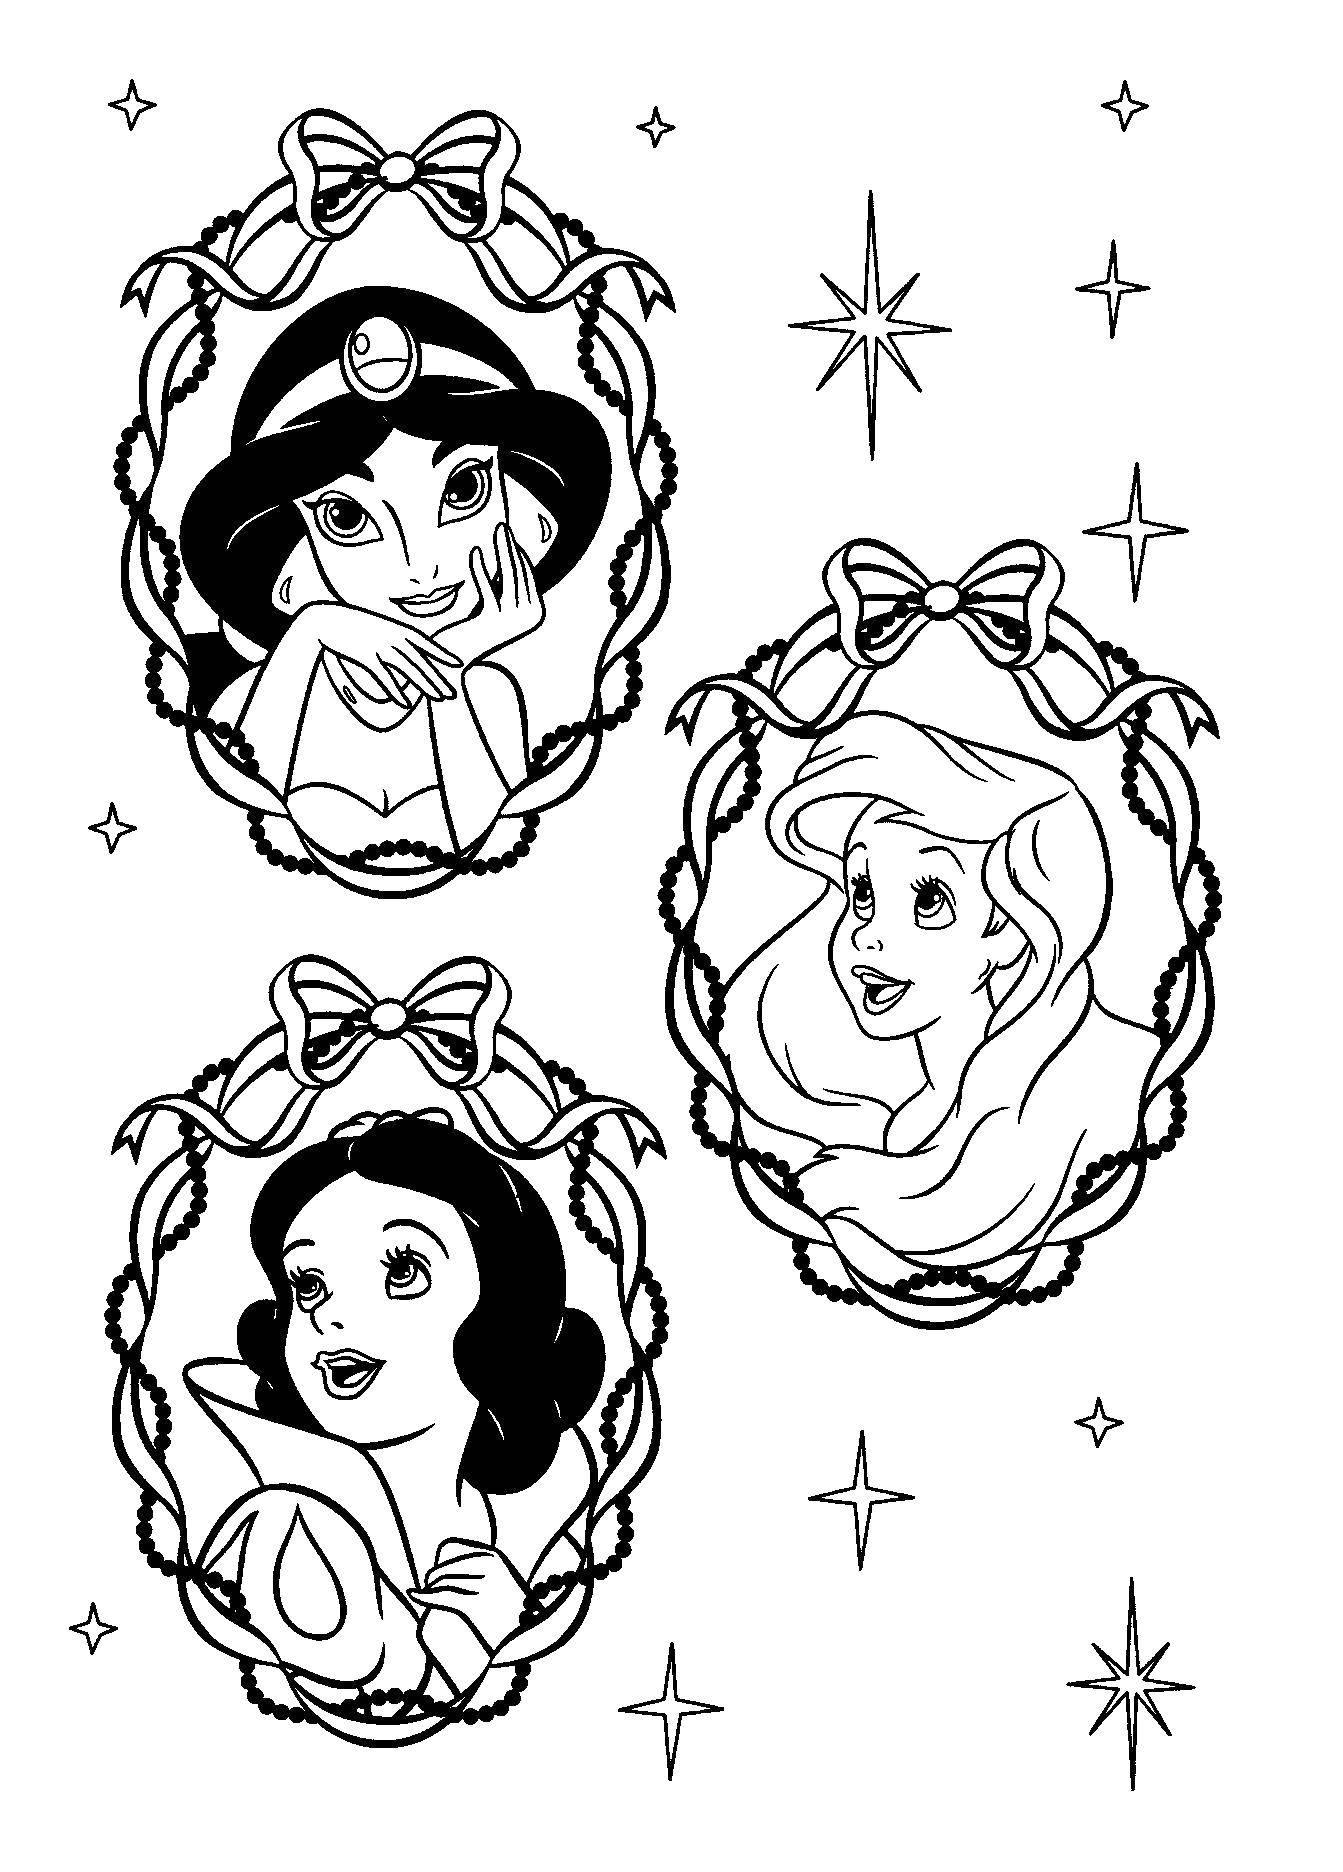 Coloring Ariel, Jasmine and snow white. Category Disney coloring pages. Tags:  Disney.